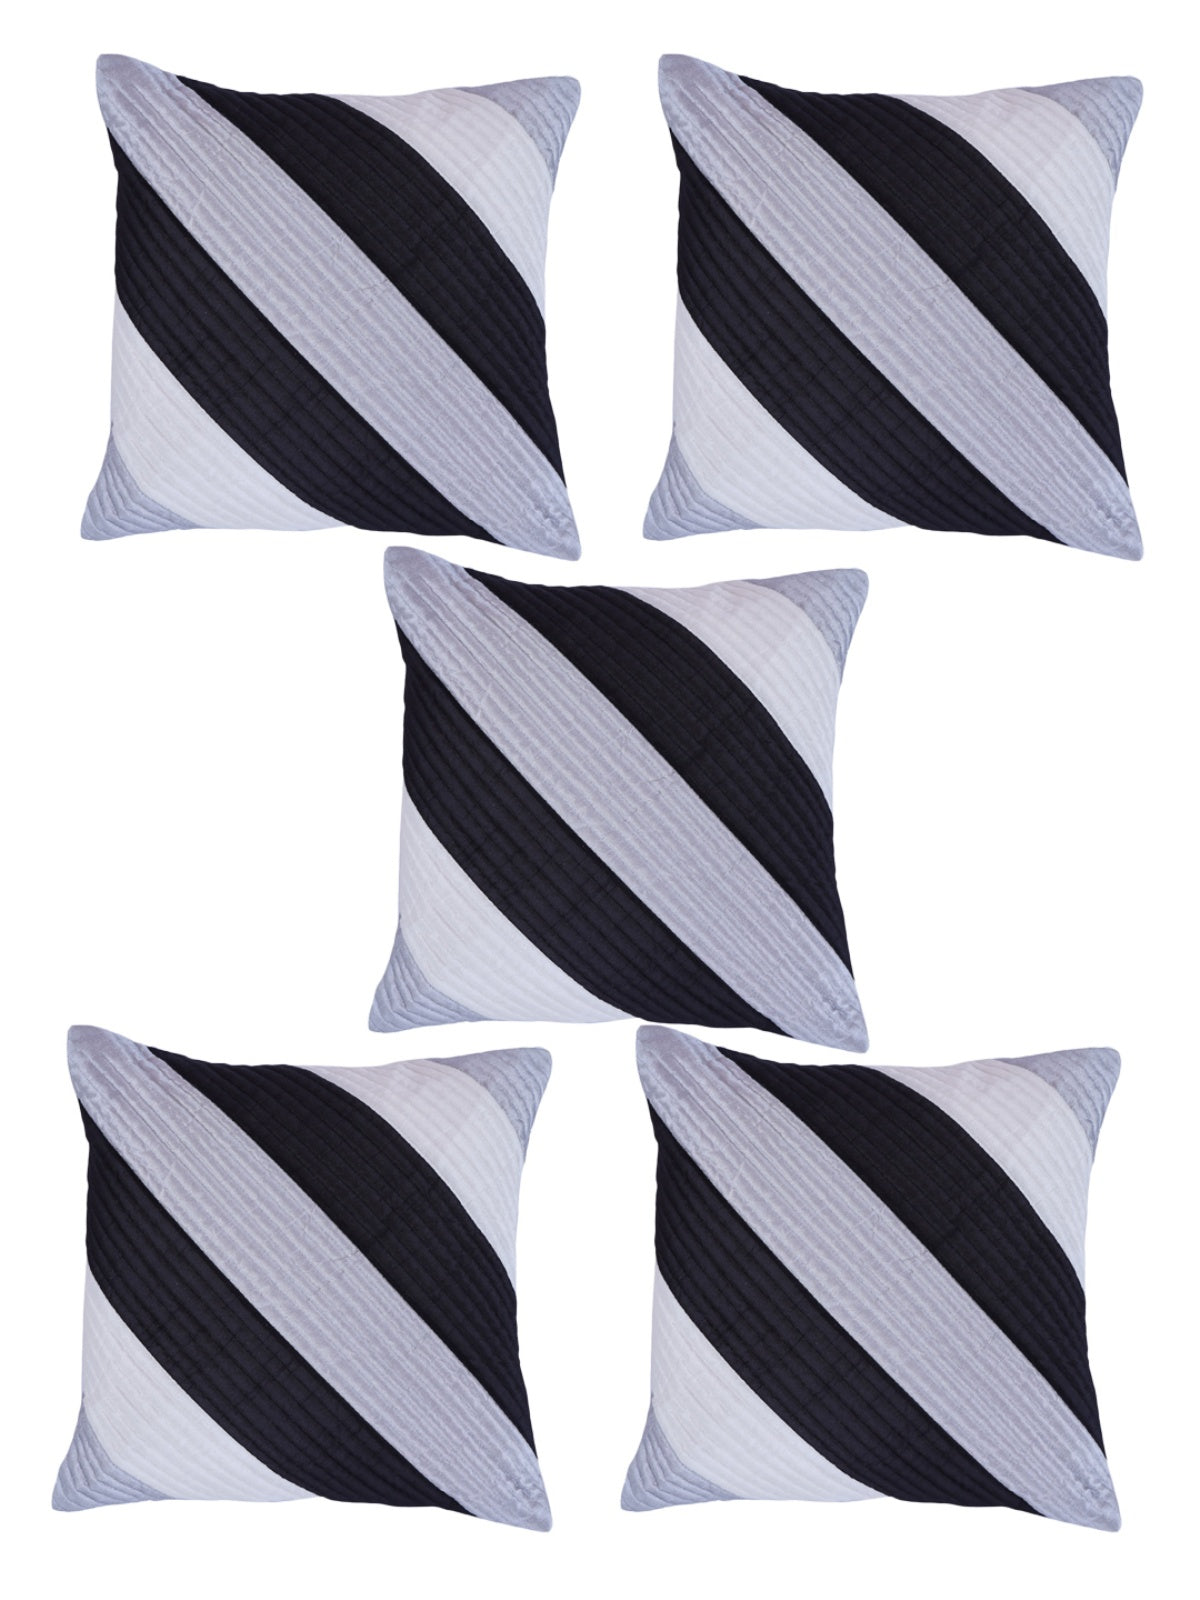 Striped Printed Polyester Cushion Cover Set of 5 - White & Navy Blue